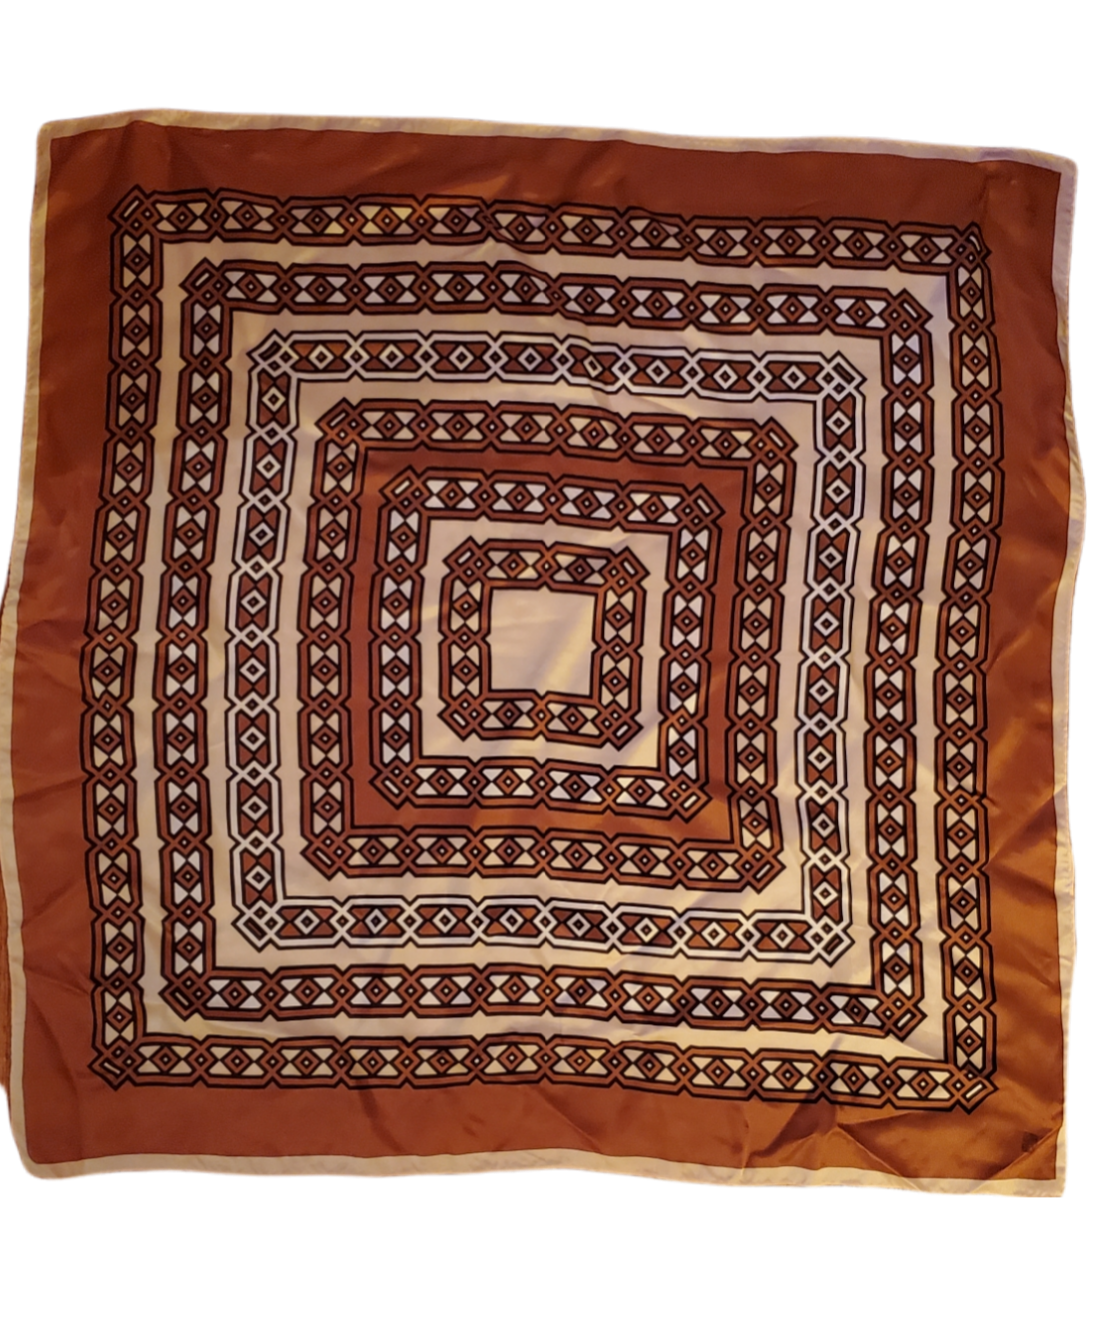 70's/80's Caramel Brown & Cream Abstract Print Scarf